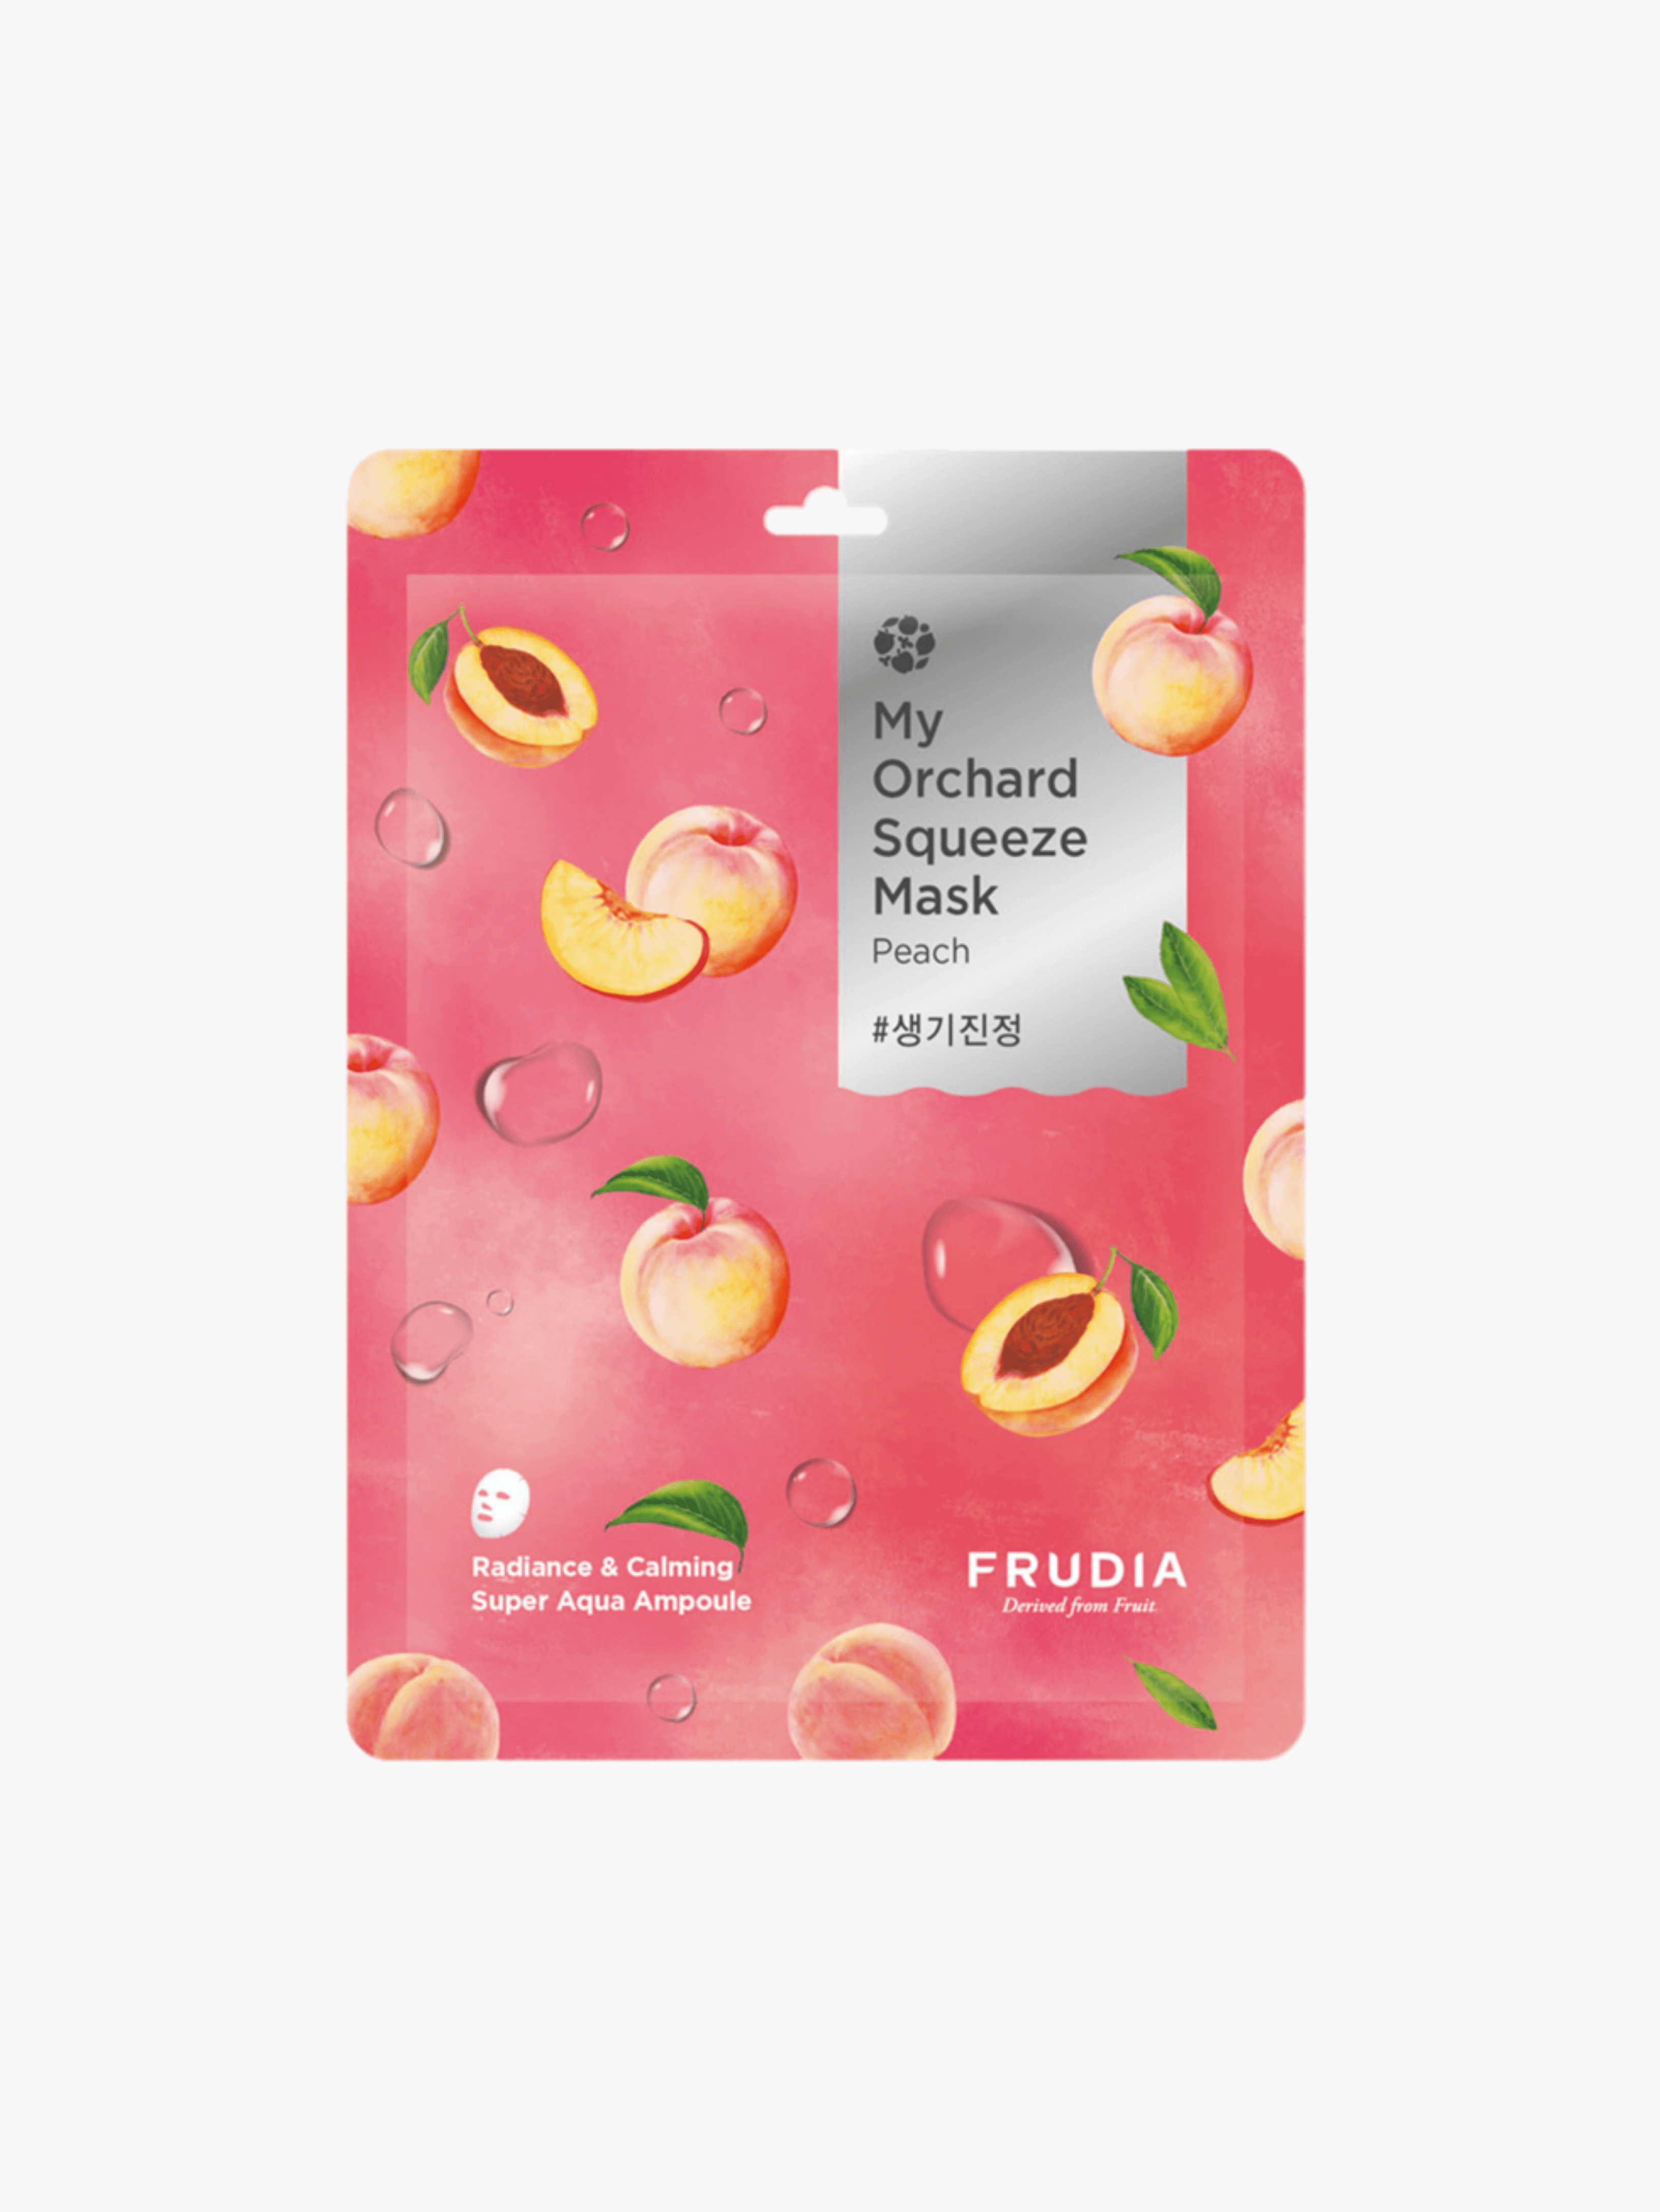 FRUDIA - Mask - My Orchard Squeeze Mask Peach